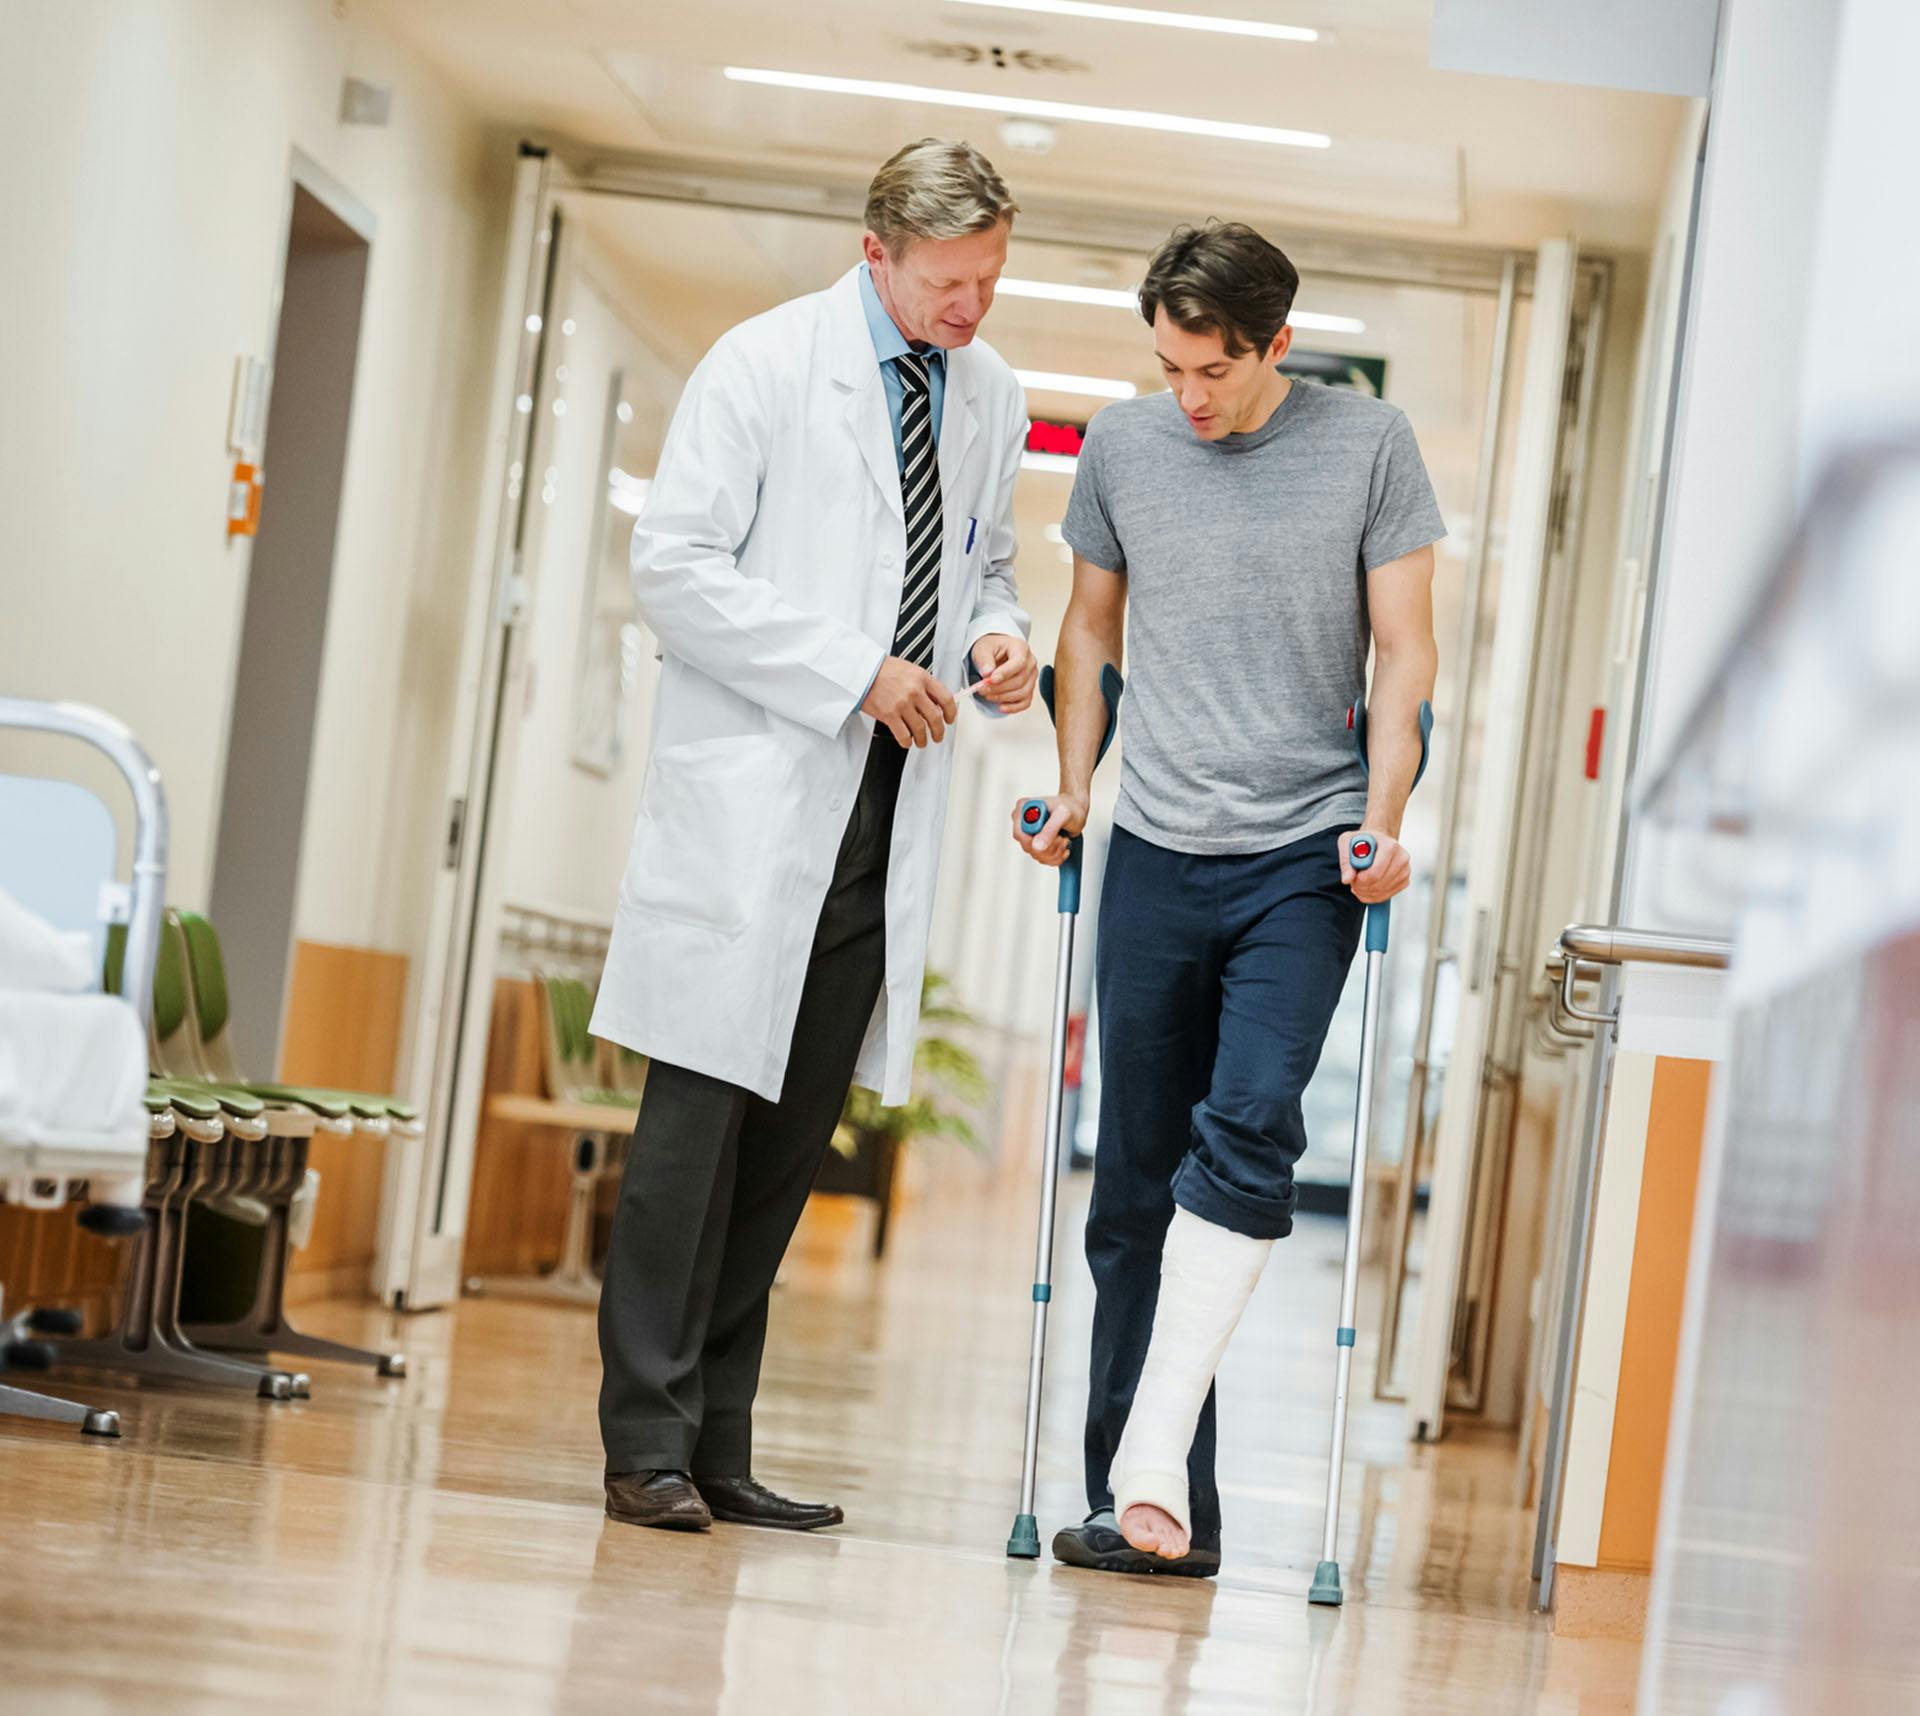 Doctor helping patient with injured leg